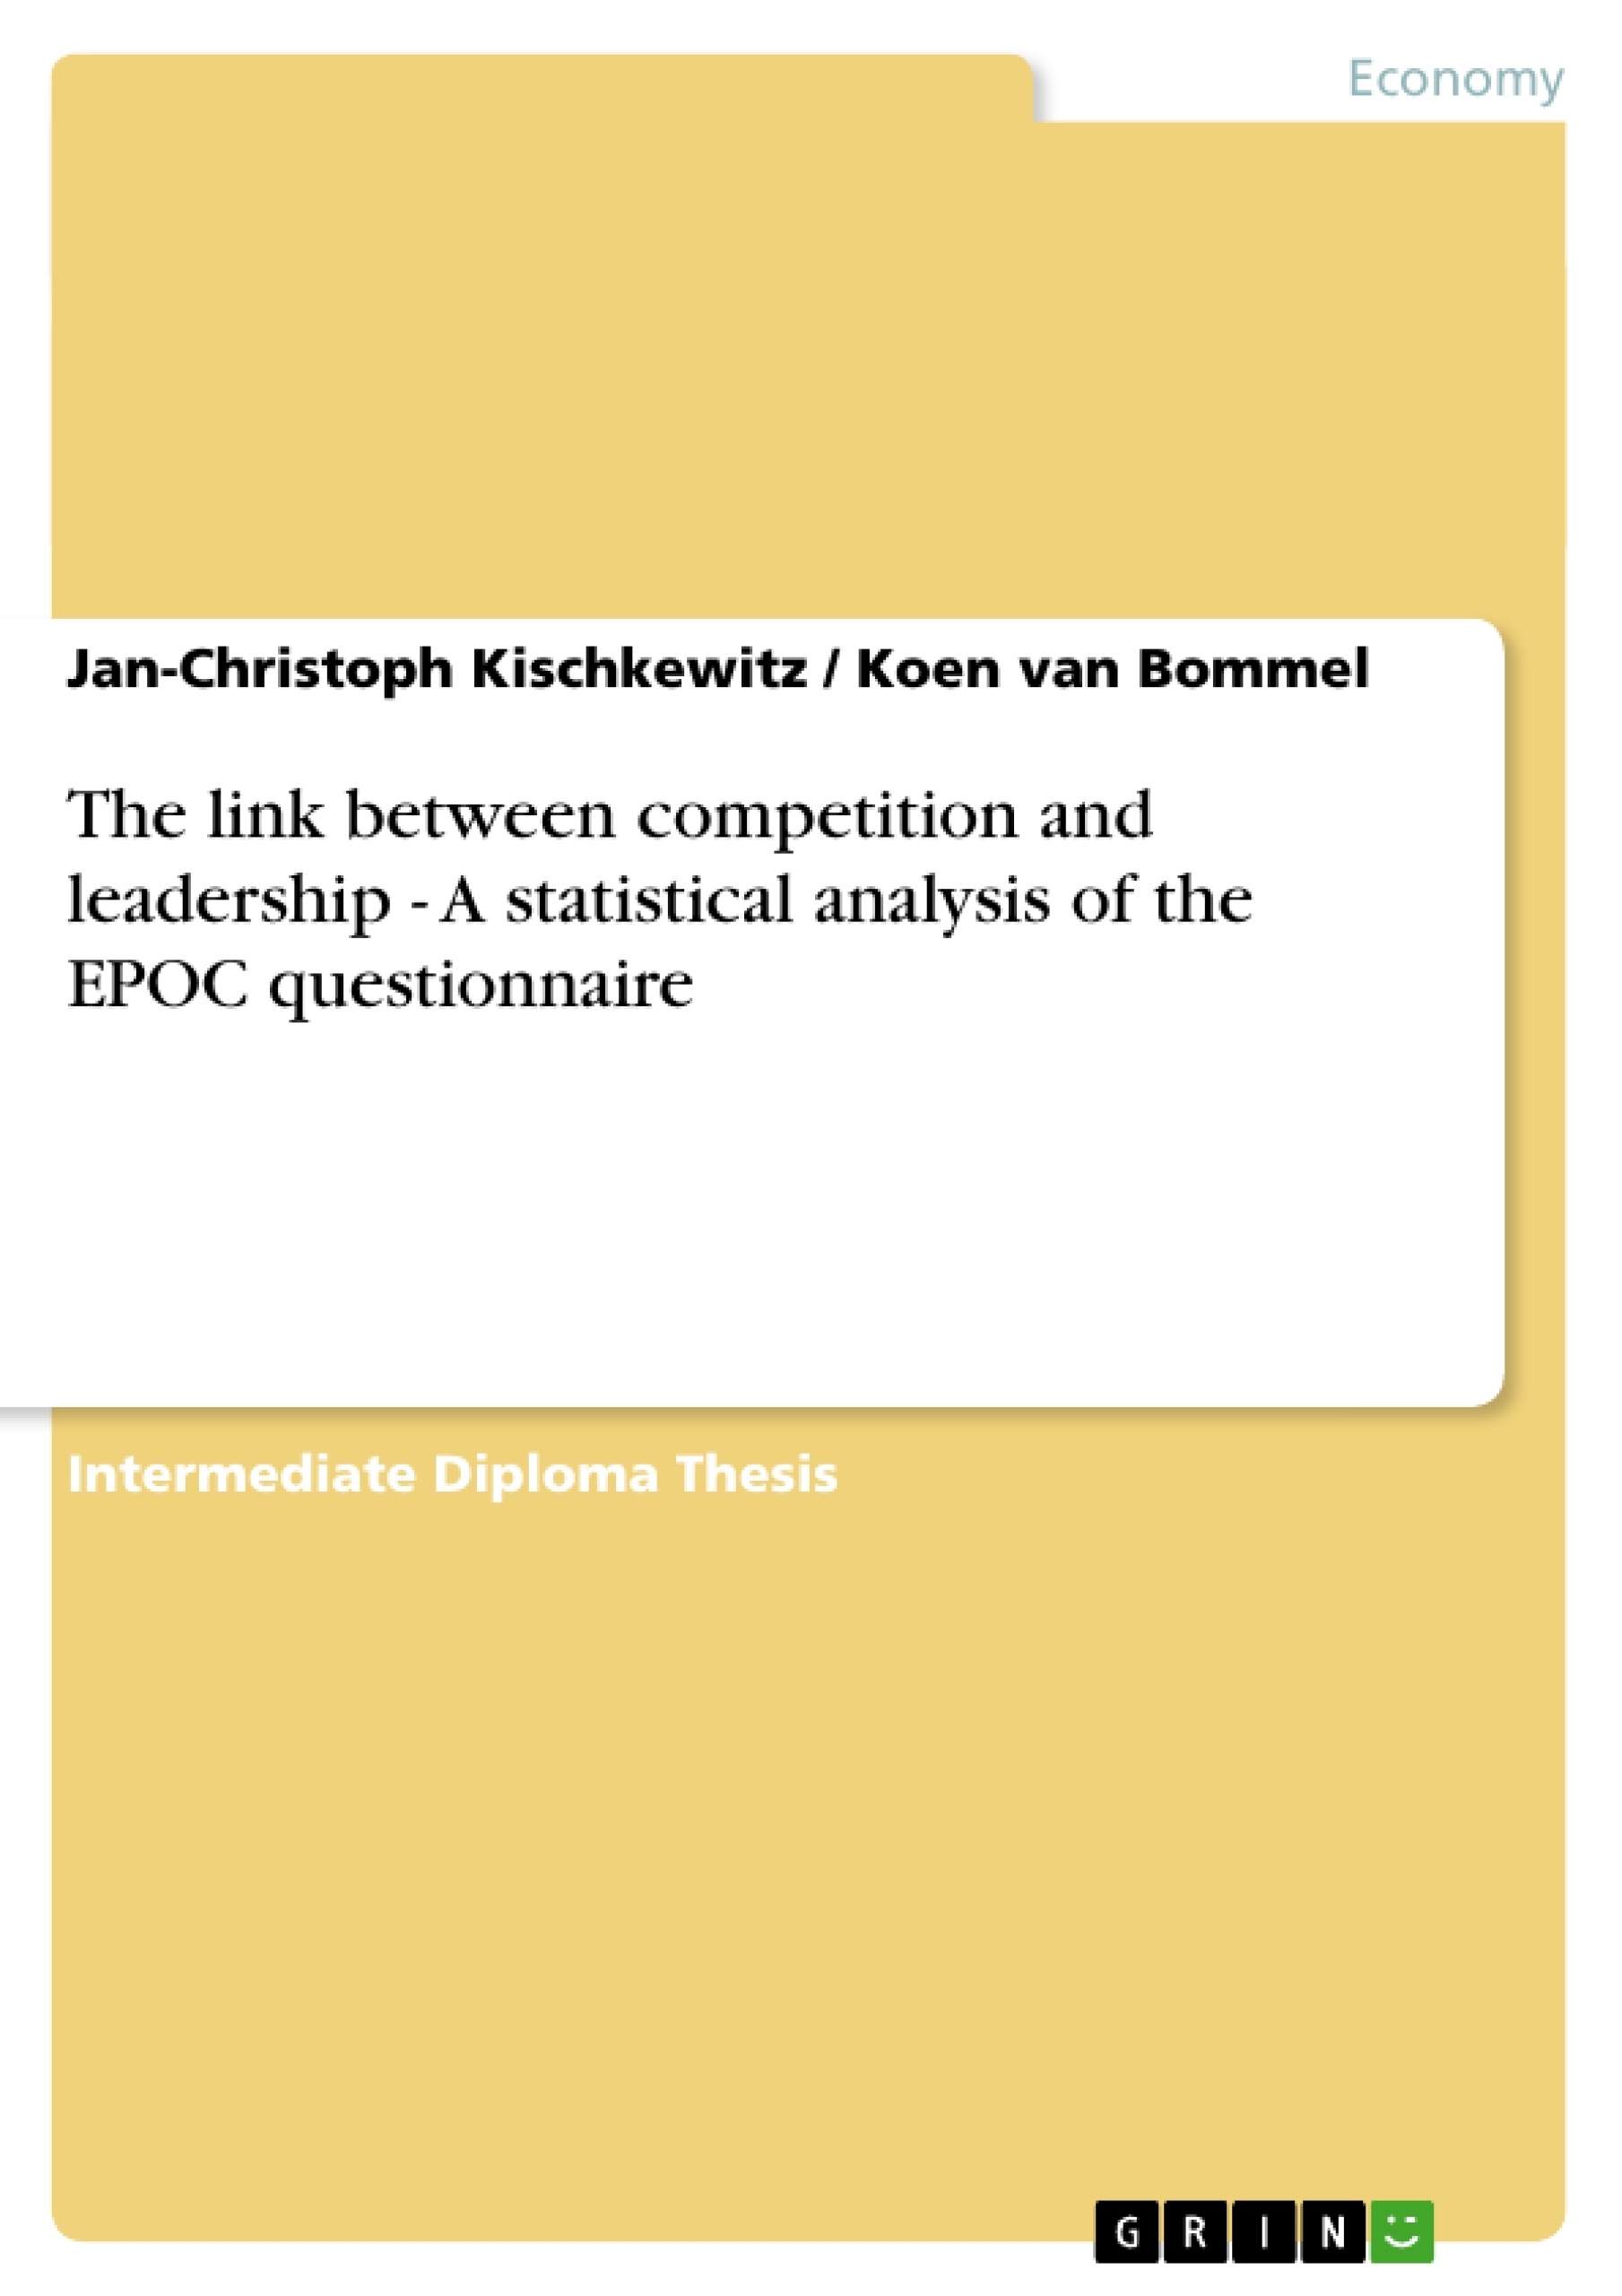 Titre: The link between competition and leadership - A statistical analysis of the EPOC questionnaire